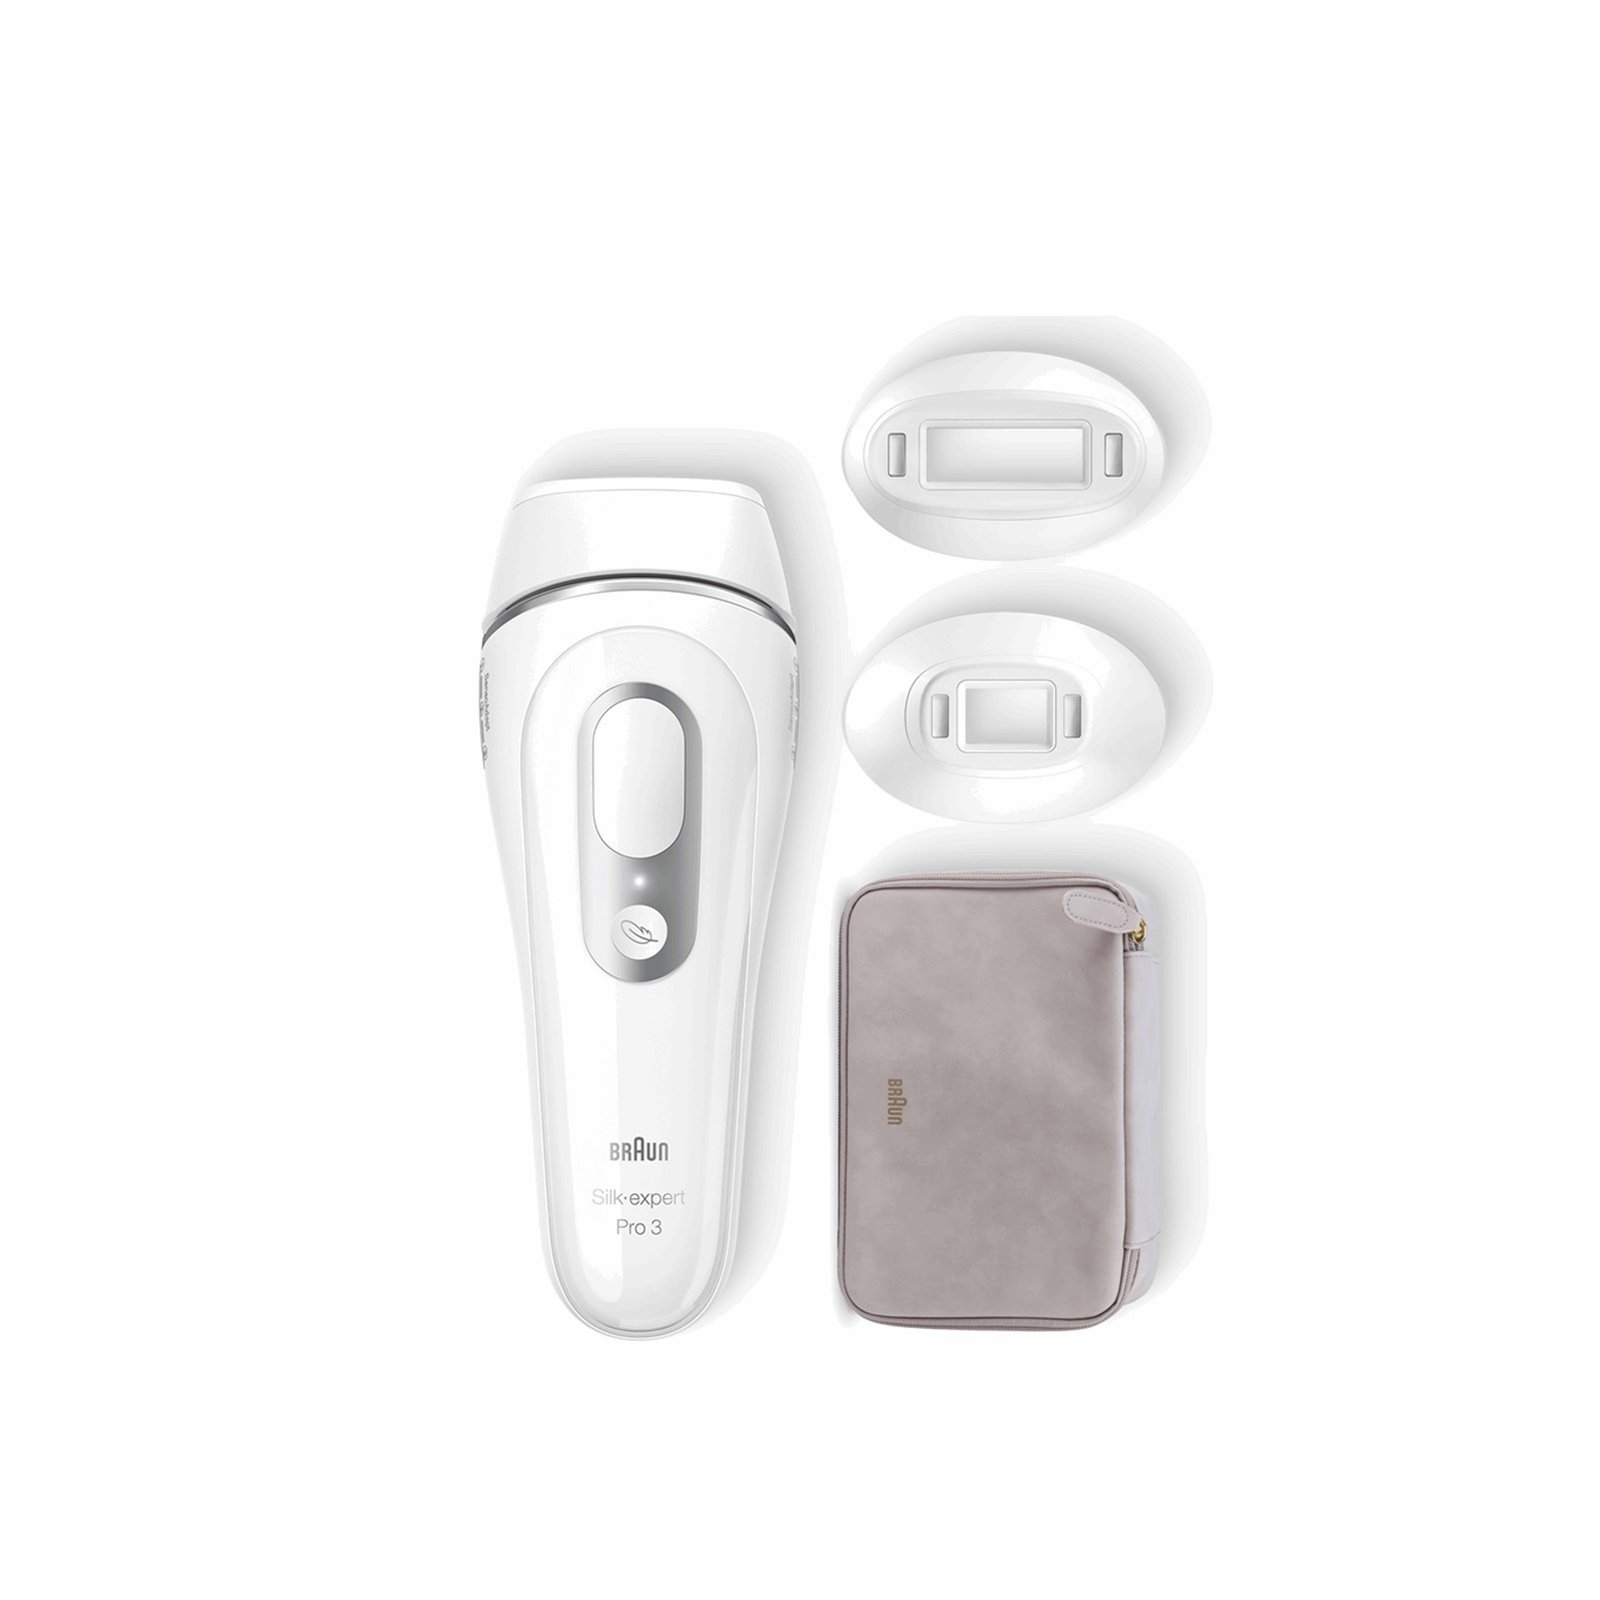 Braun Silk Expert Pro 5 PL5014 IPL Hair Removal System for sale